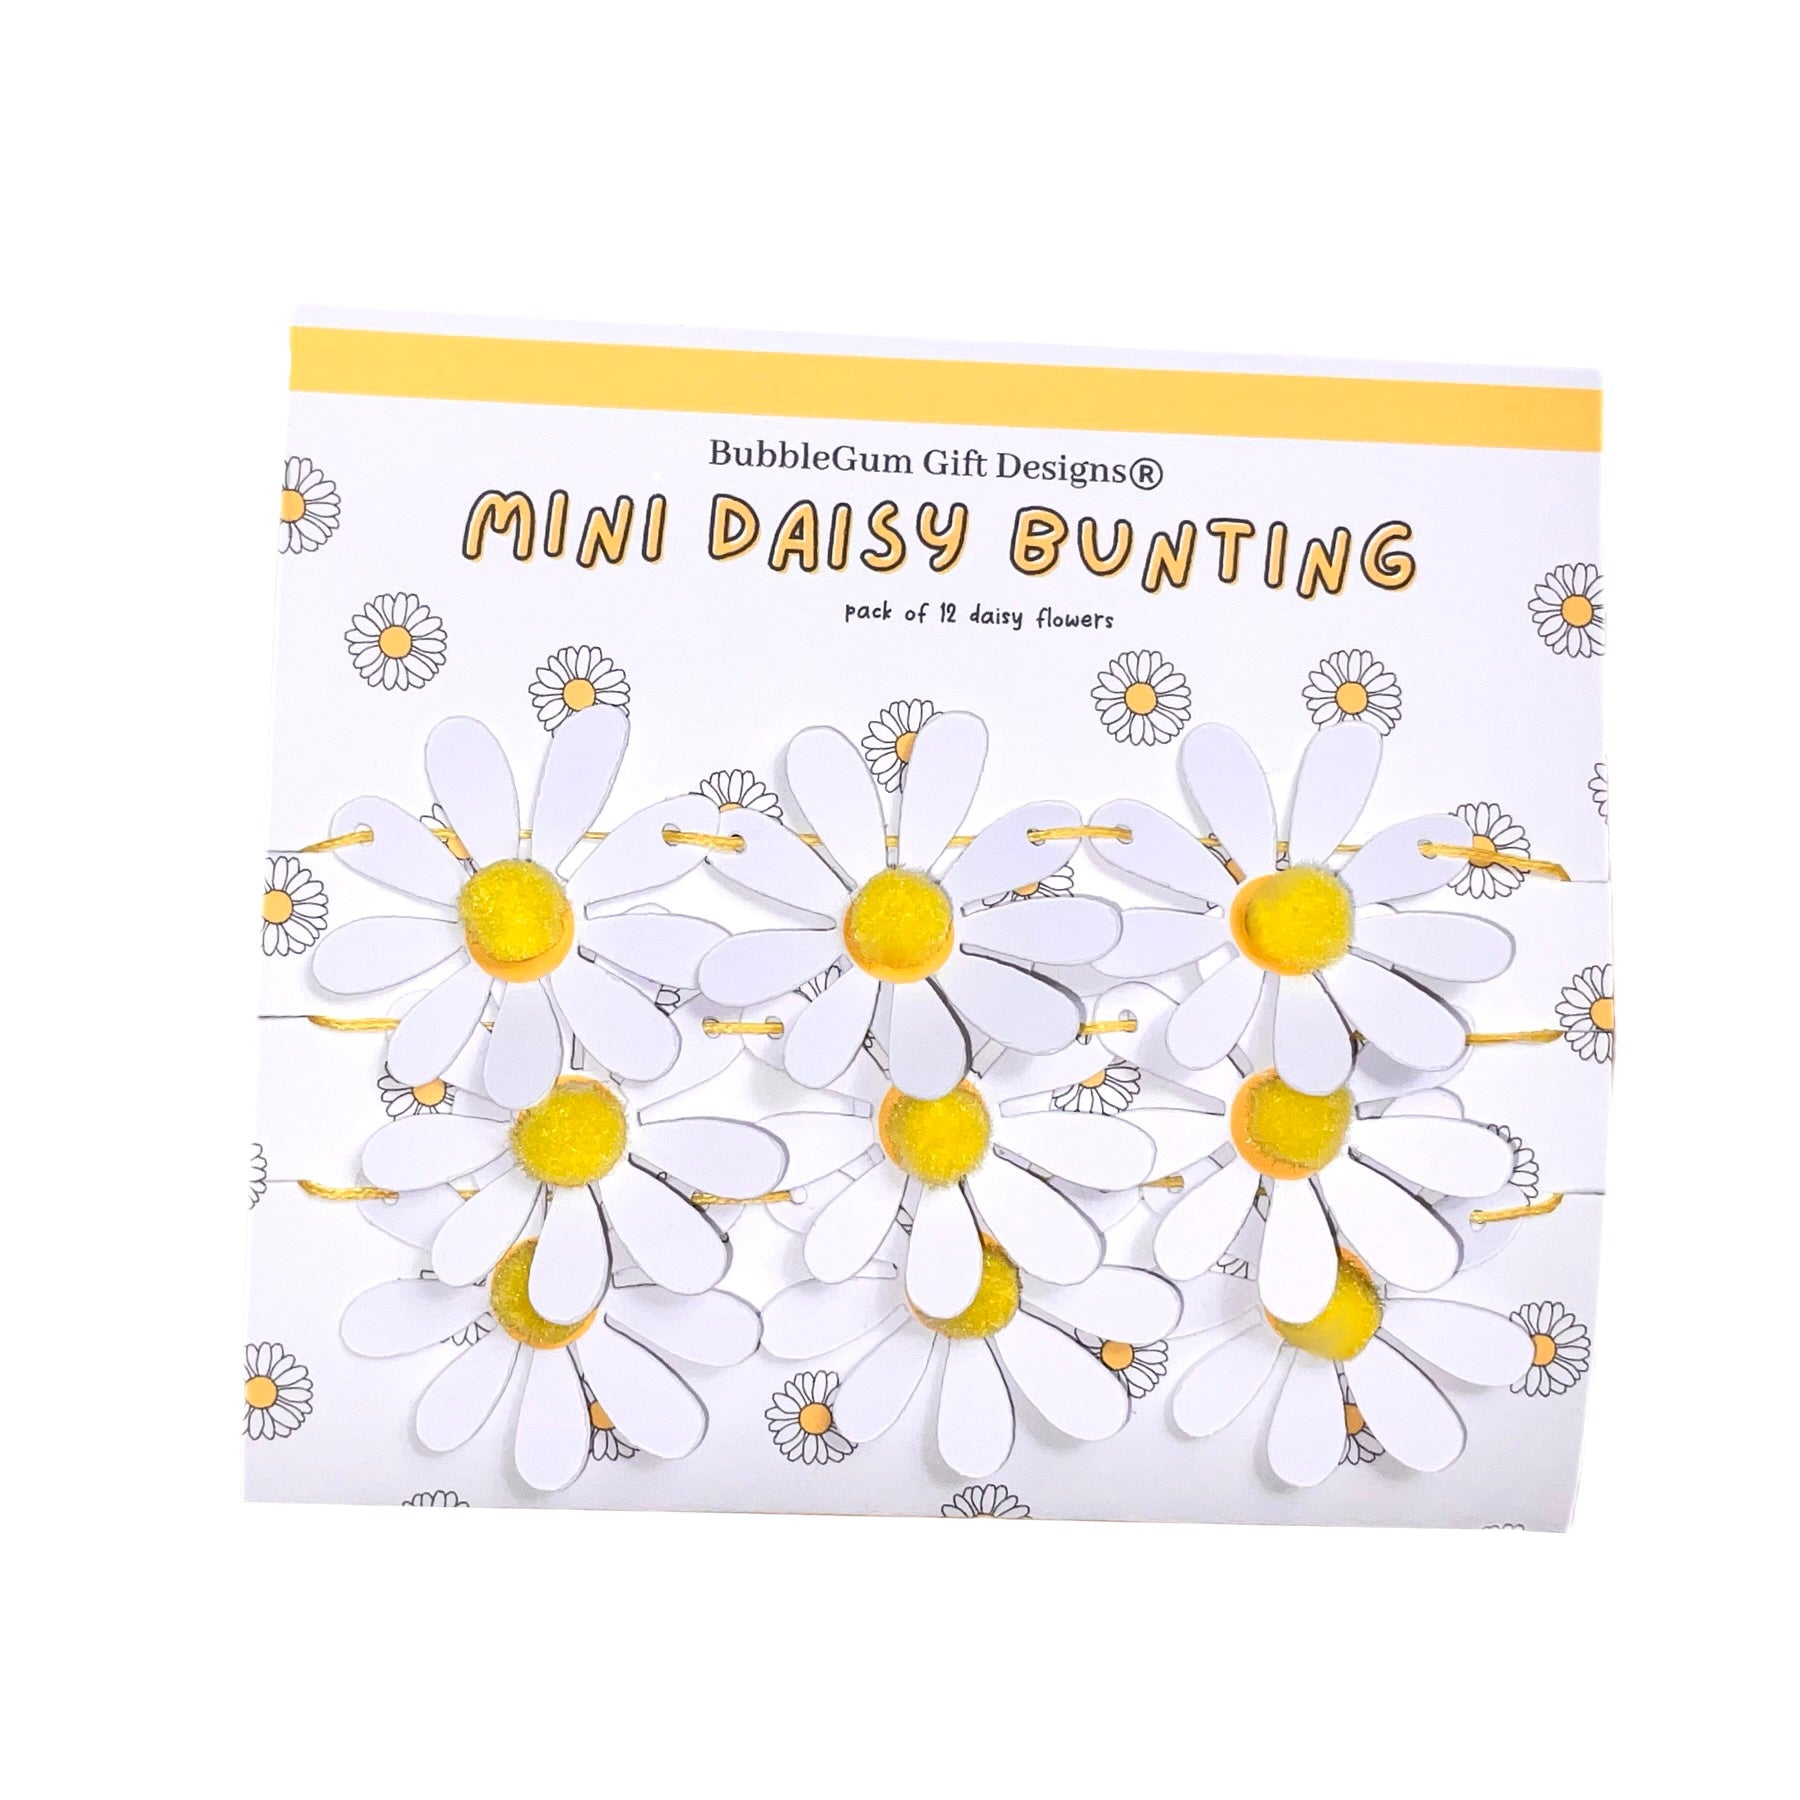 All made from premium quality card, a pack of 12 beautiful spring loaded daisies with yellow Pom Pom centres, all attached to yellow string measuring approximately 34” long with each flower measuring approximately 5cm x 5cm and all packaged beautifully to reach you in perfect condition.  A really pretty addition to add to your shelves, wall decor, windows, wherever you would like to add a dash of cheerfulness as we enter Spring.